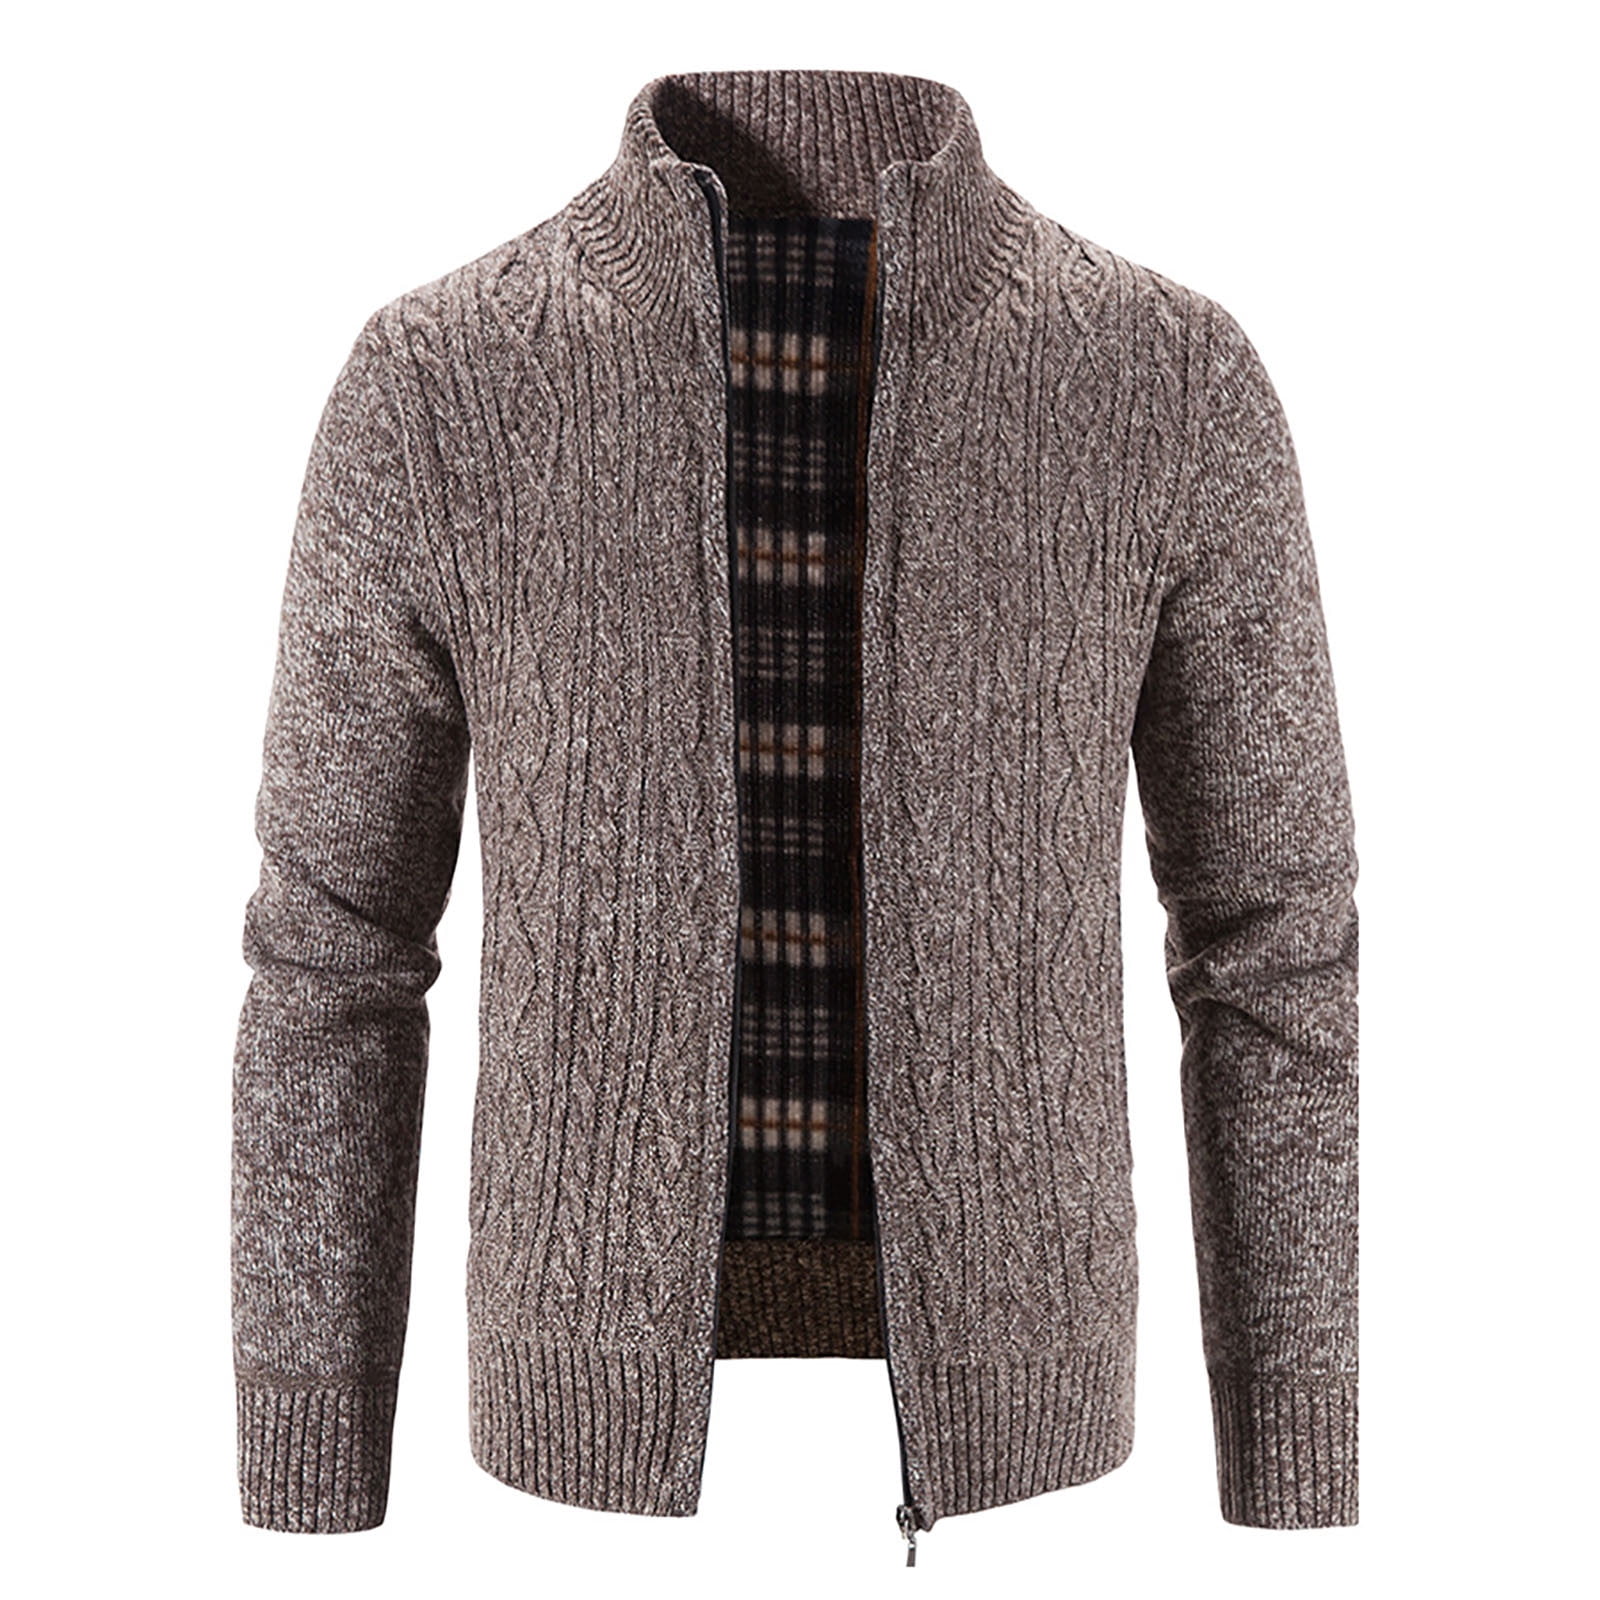 Mens Zip Up Knitted Cardigan Thick Sweater Stand Collar Fleece Lined ...